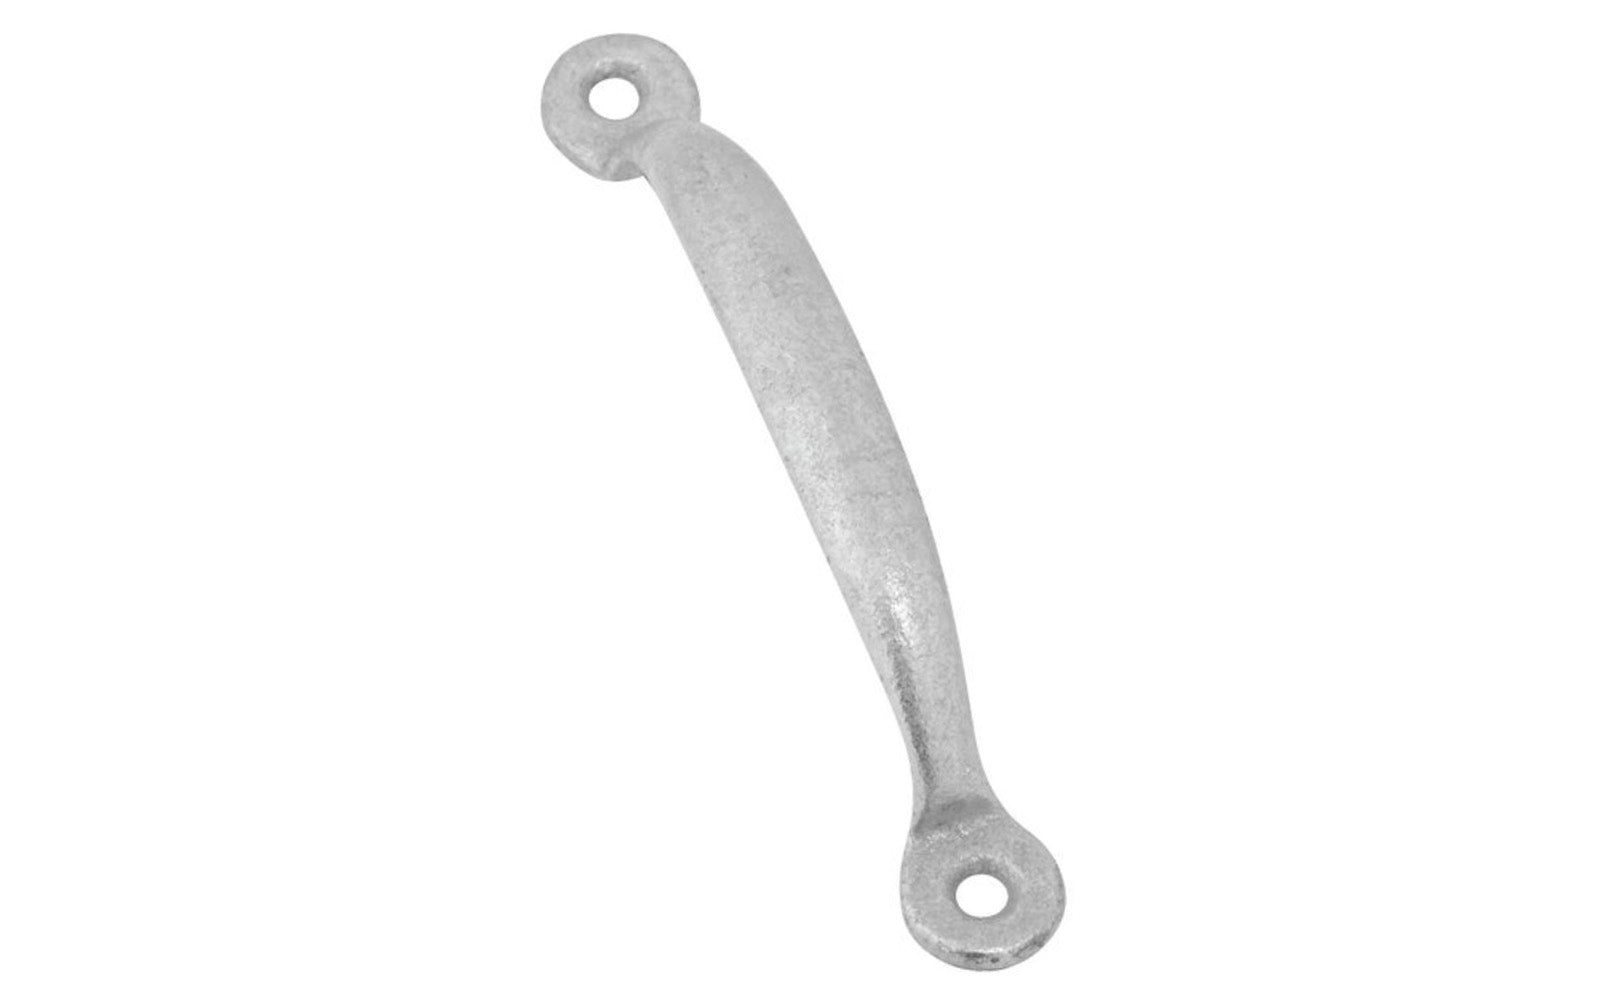 This galvanized utility pull is designed for use on screen doors, & other applications. Includes fasteners. Galvanized steel material. 4-3/4" overall size & 4-1/4" on centers. National Hardware Model N117-721.